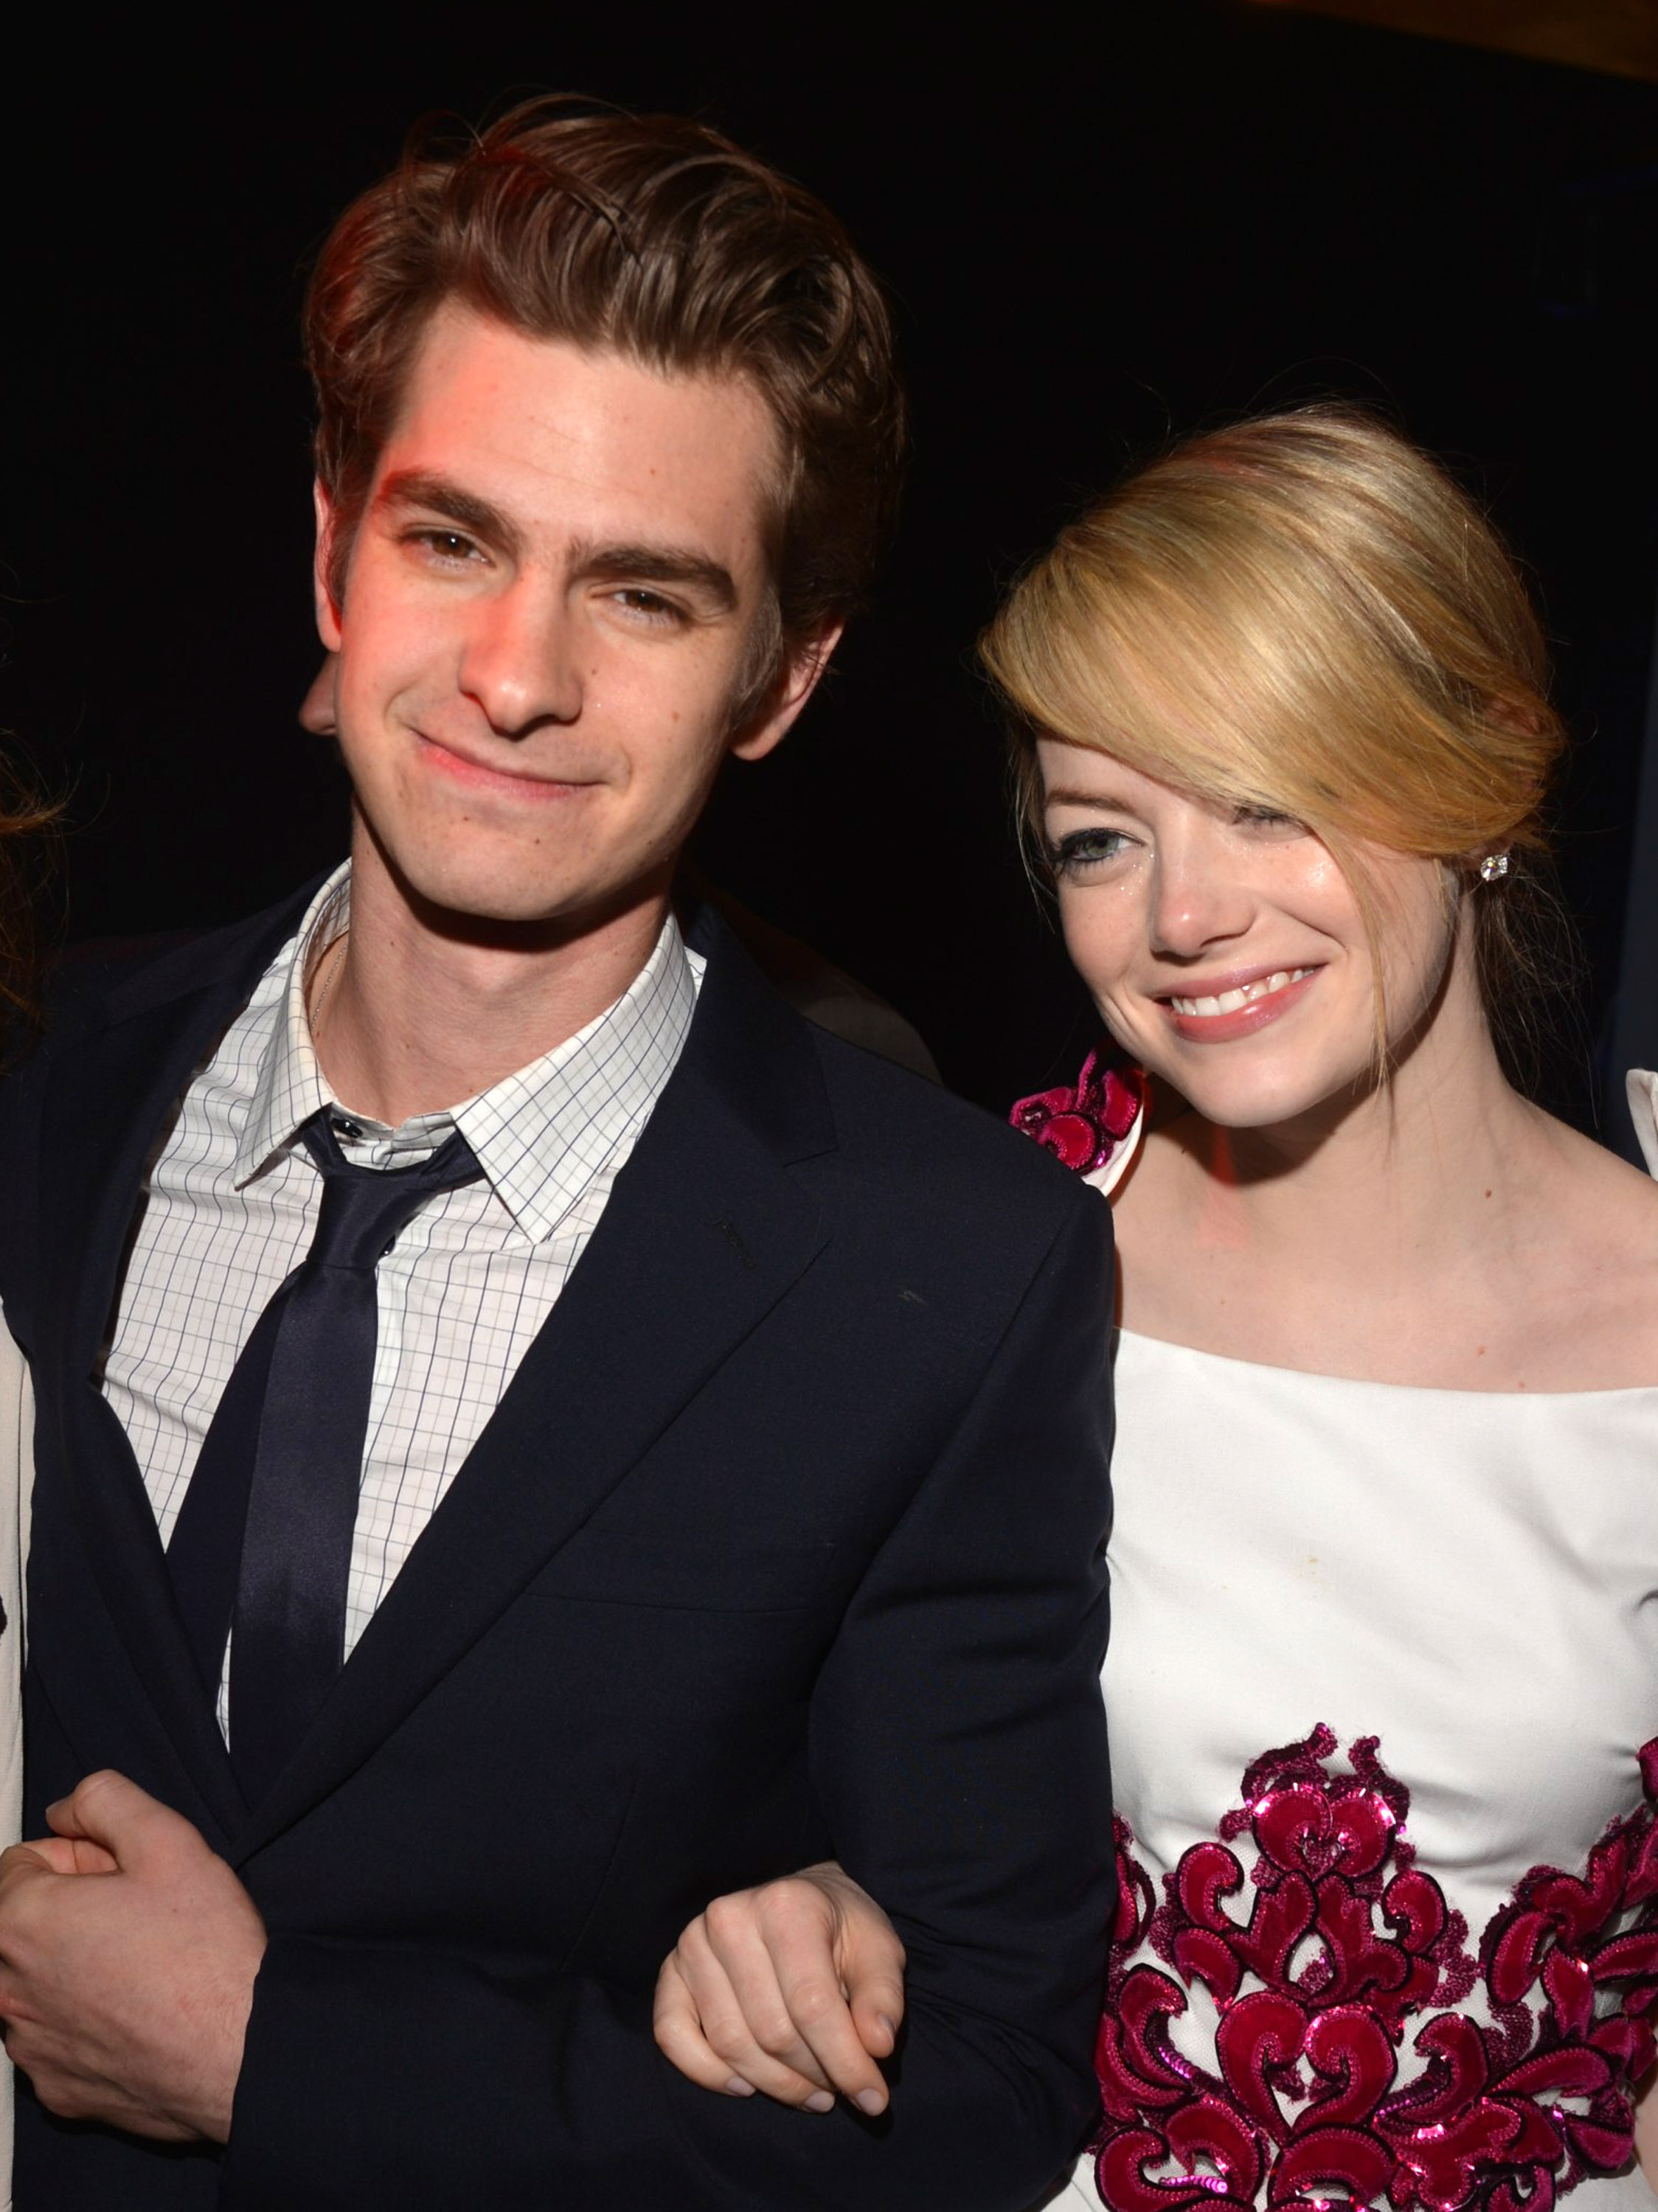 Andrew Garfield and Emma Stone attend the afterparty for the Los Angeles premiere of The Amazing Spider-man -n 2012.